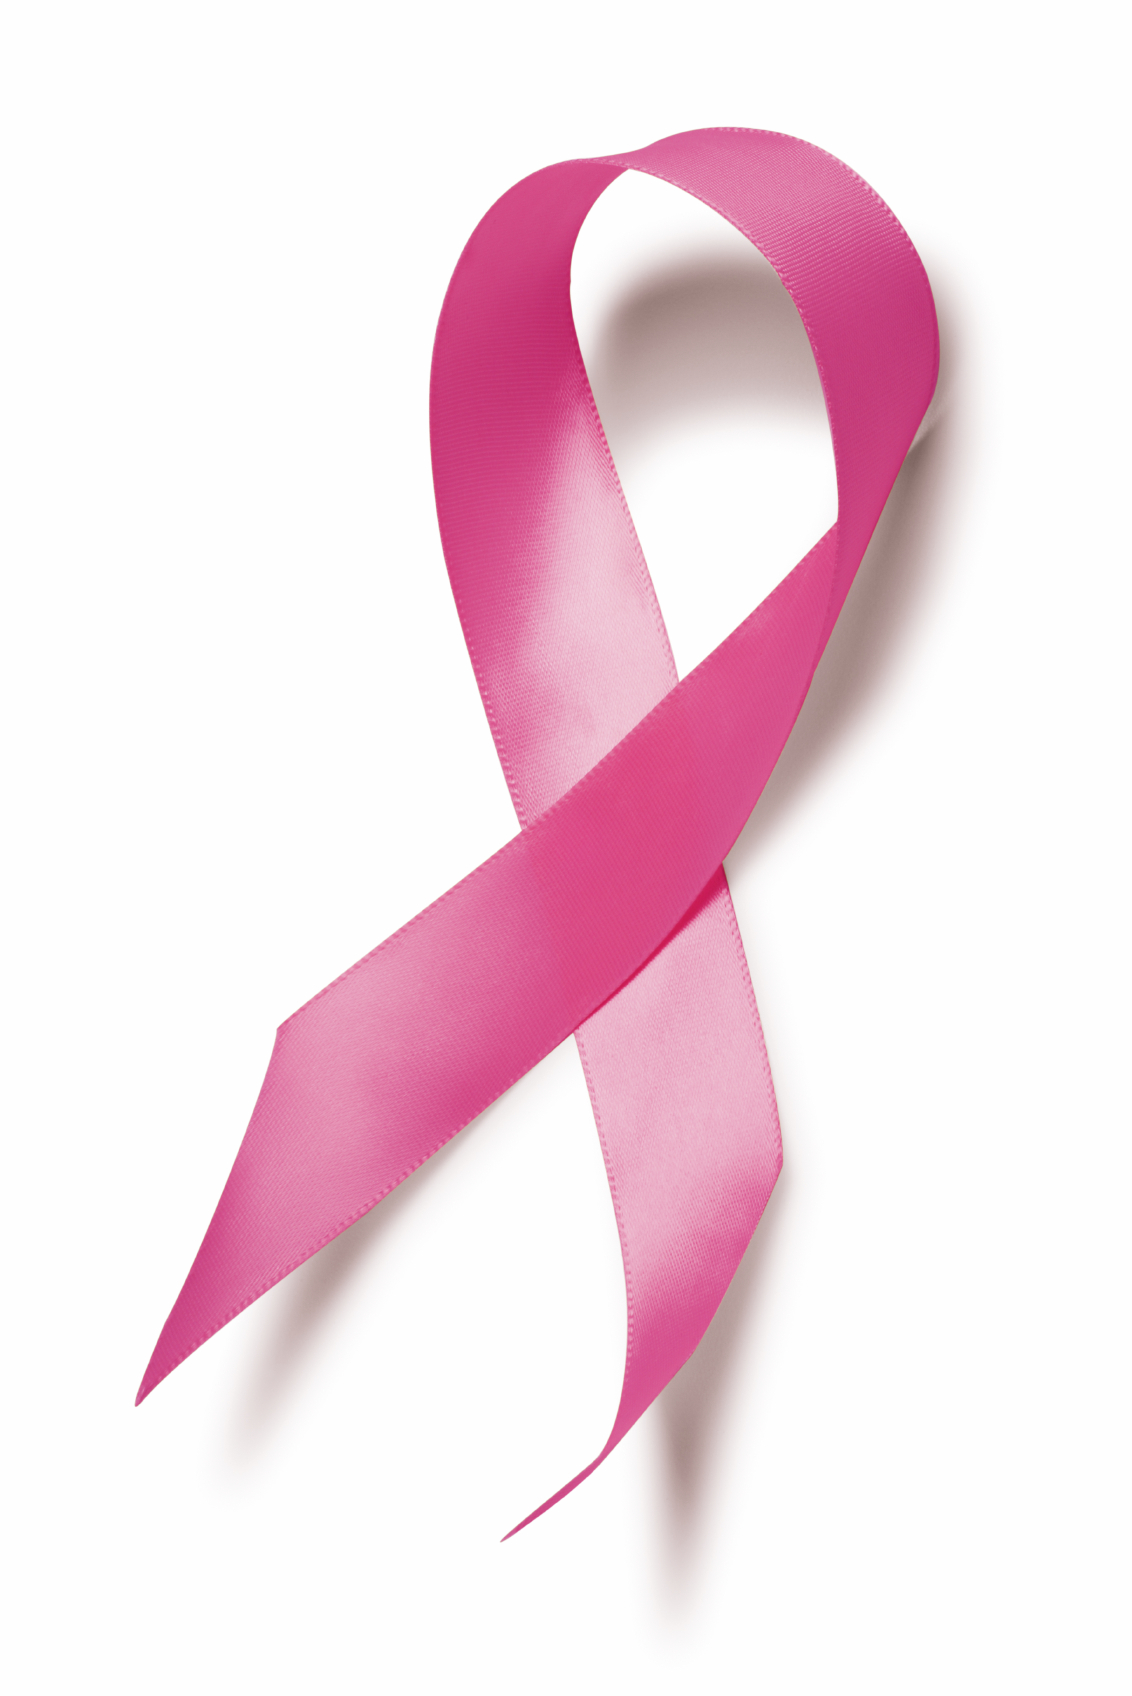 Breast Cancer Ribbon 2 Clip Art Vector Online Royalty Free on ...